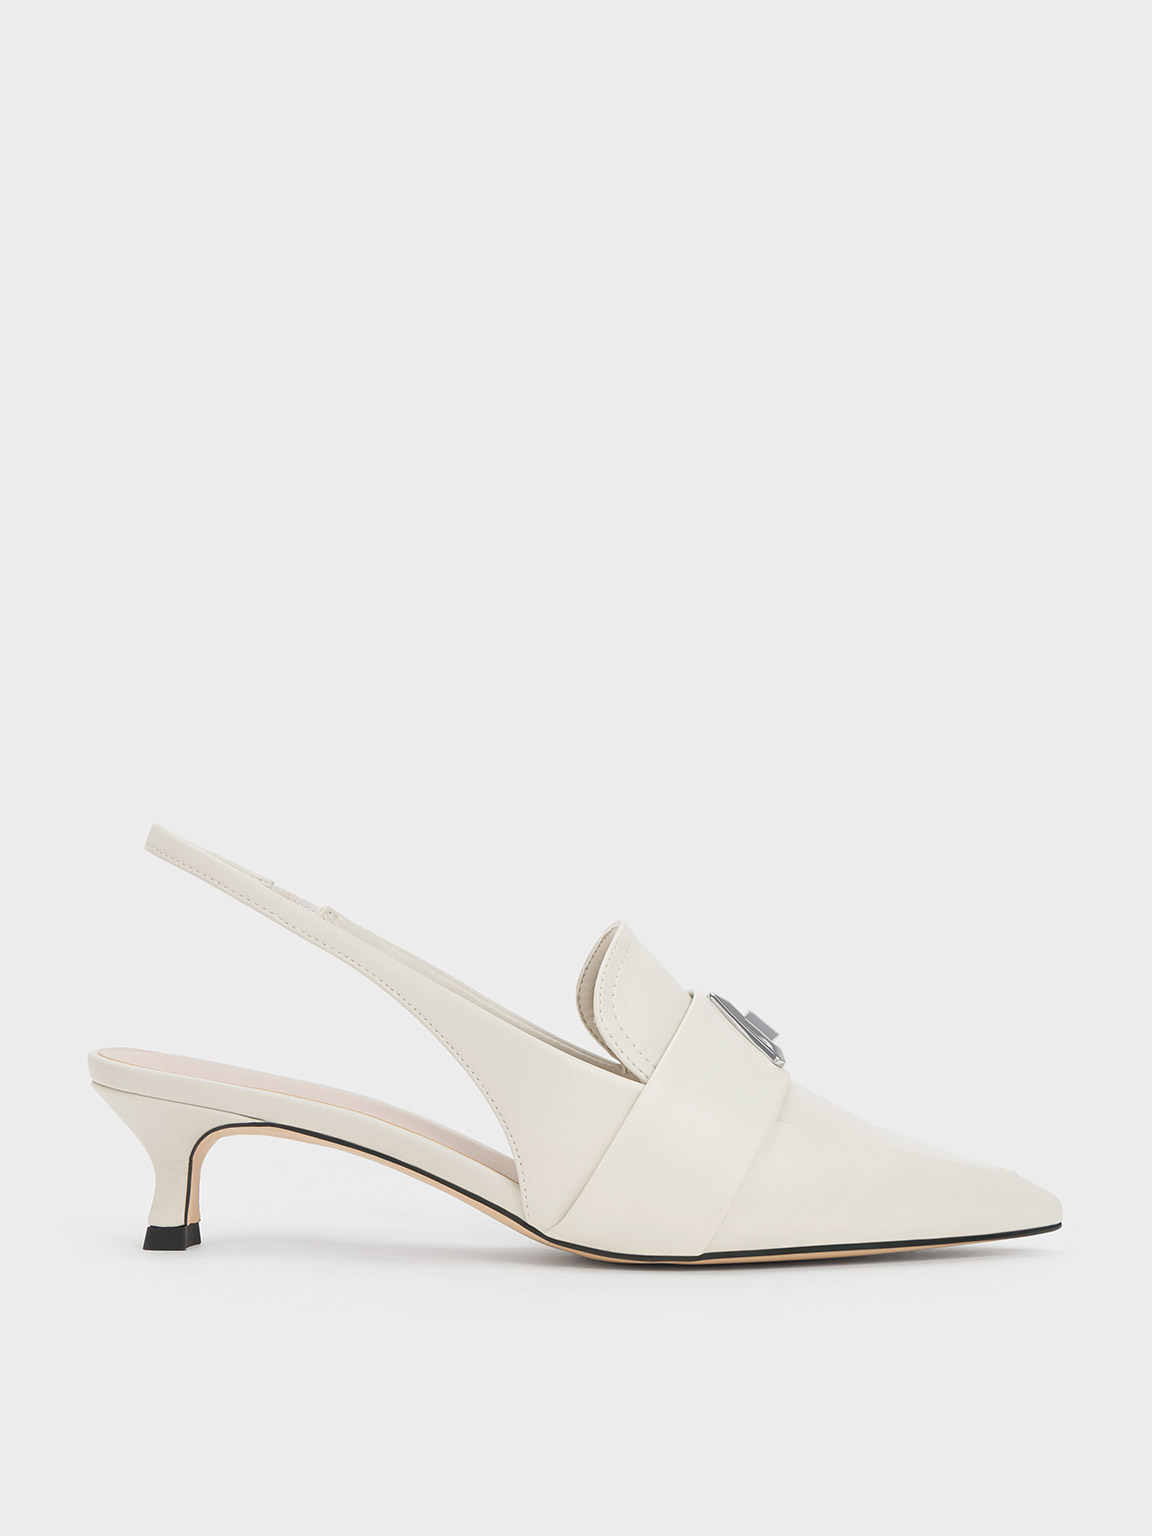 Trice Metallic Accent Pointed-Toe Slingback Pumps